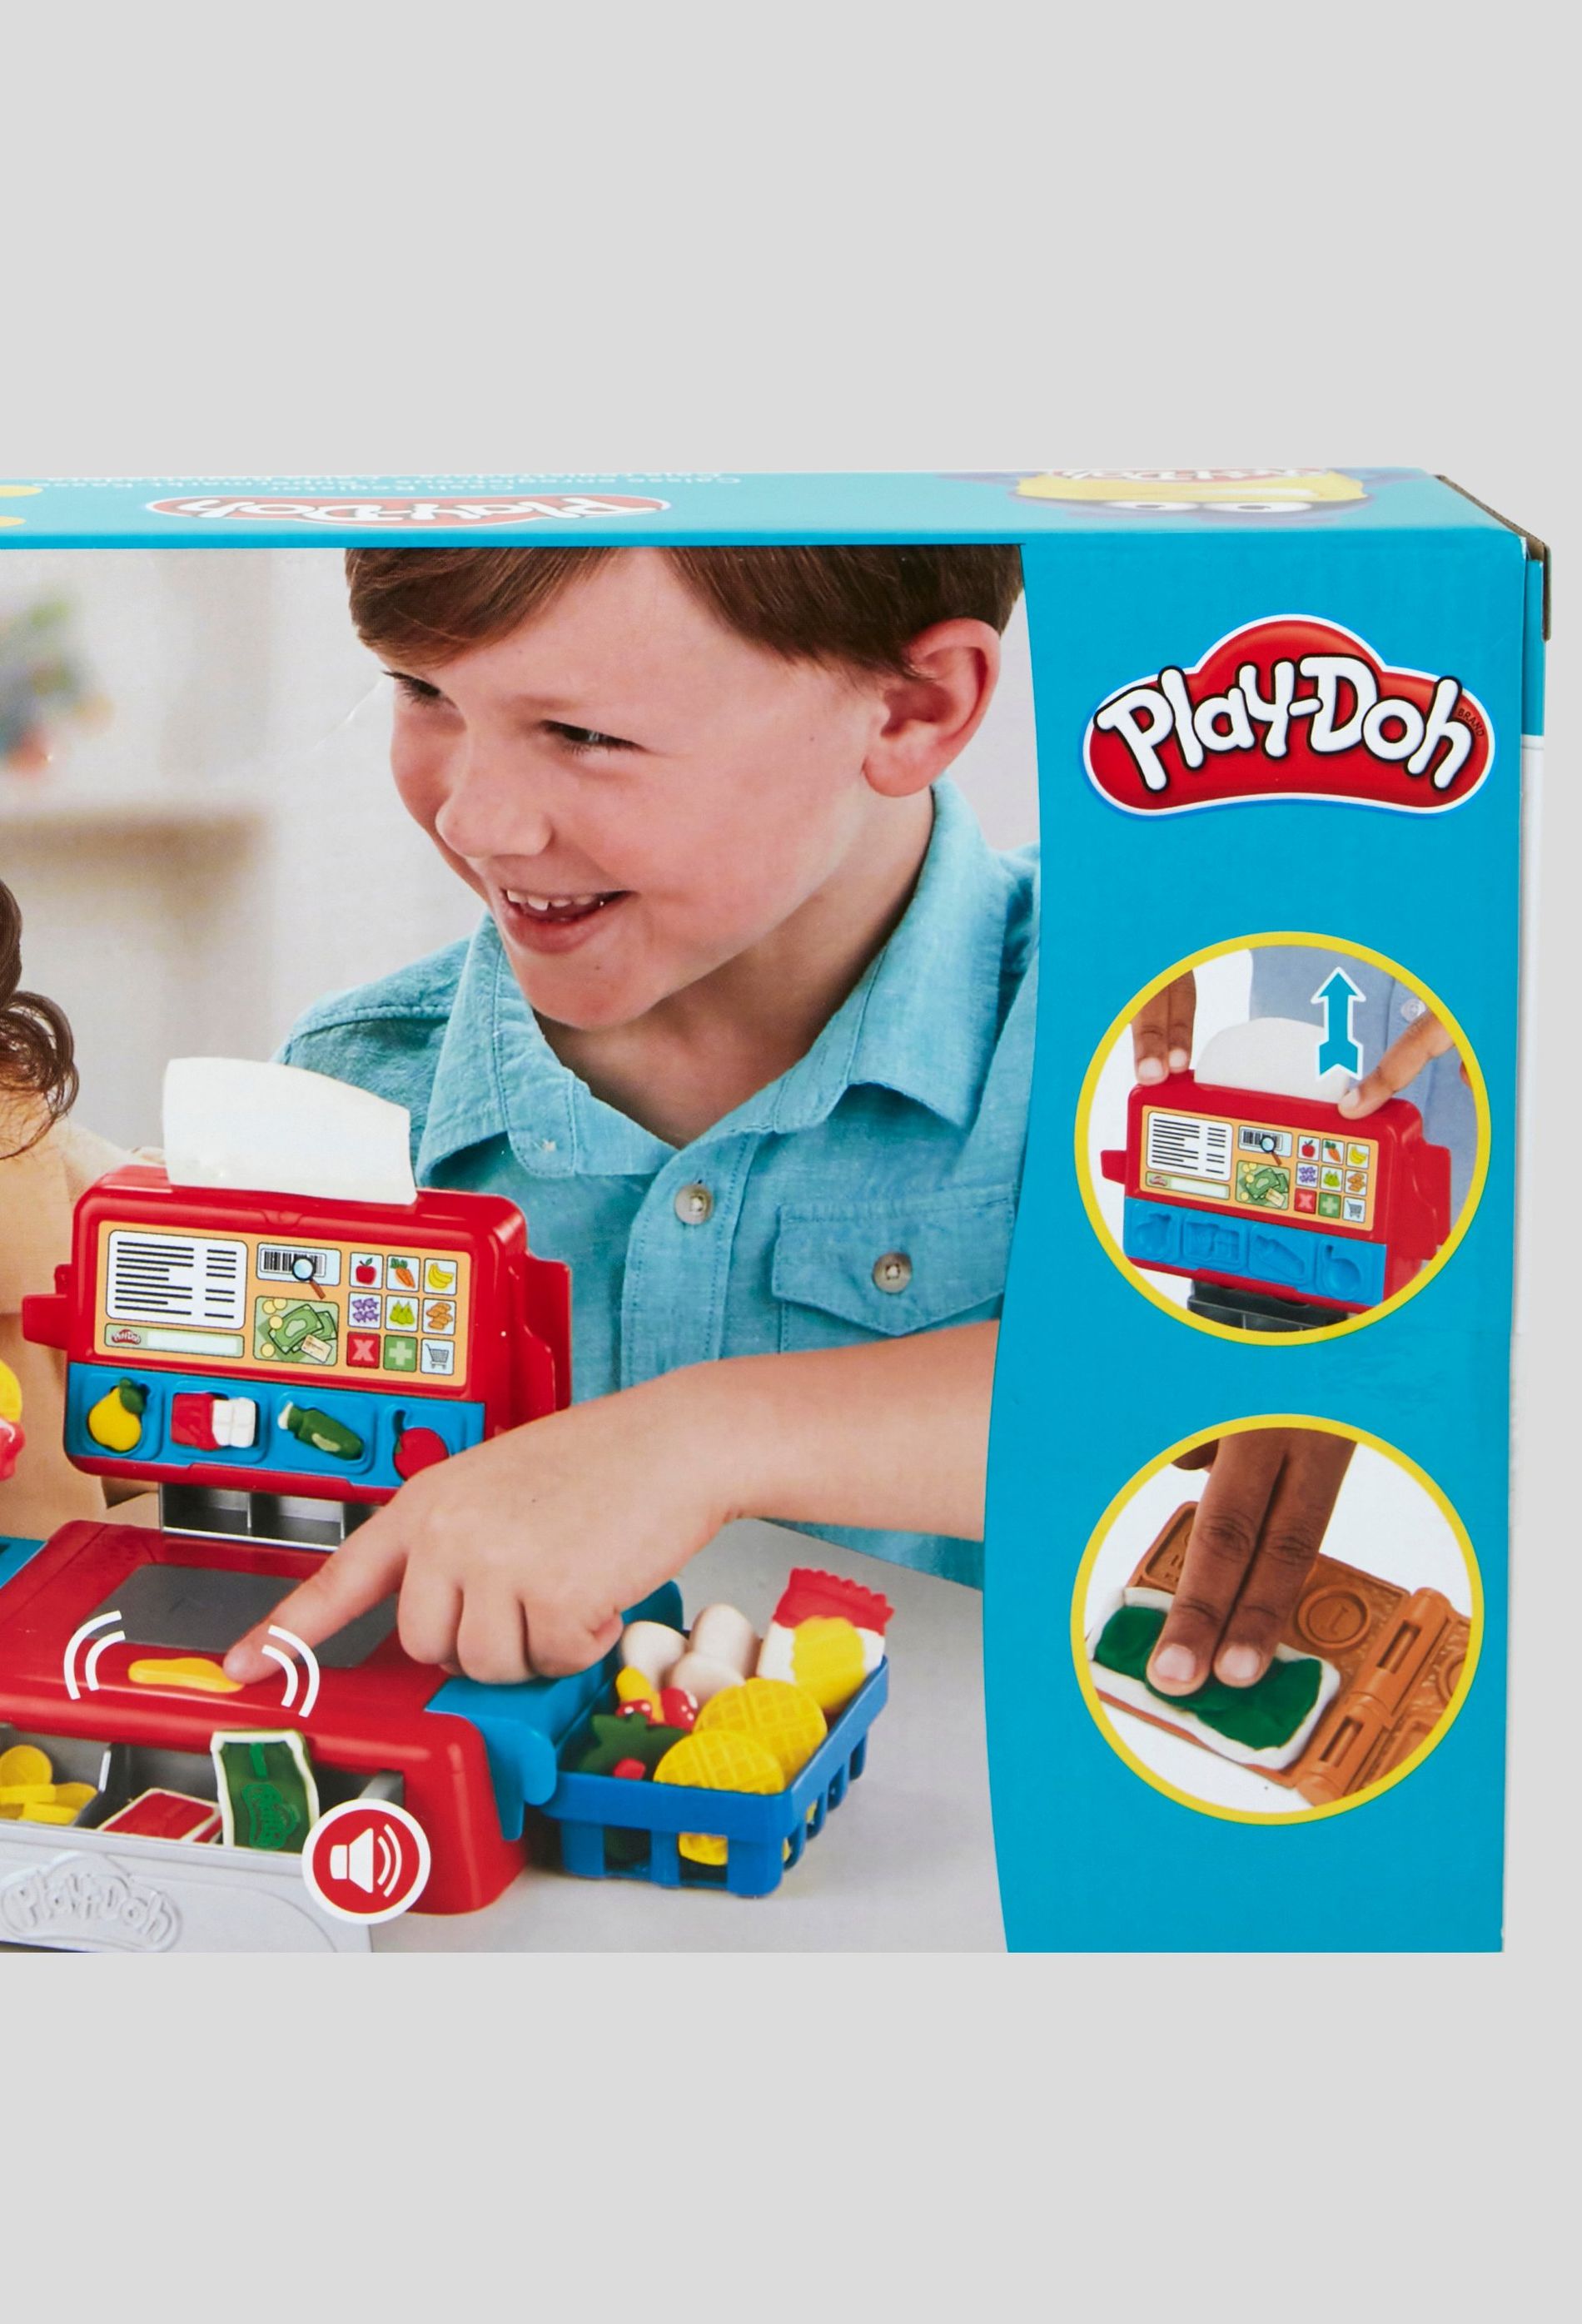 Caisse enregistreuse play doh Ocre Play Doh 